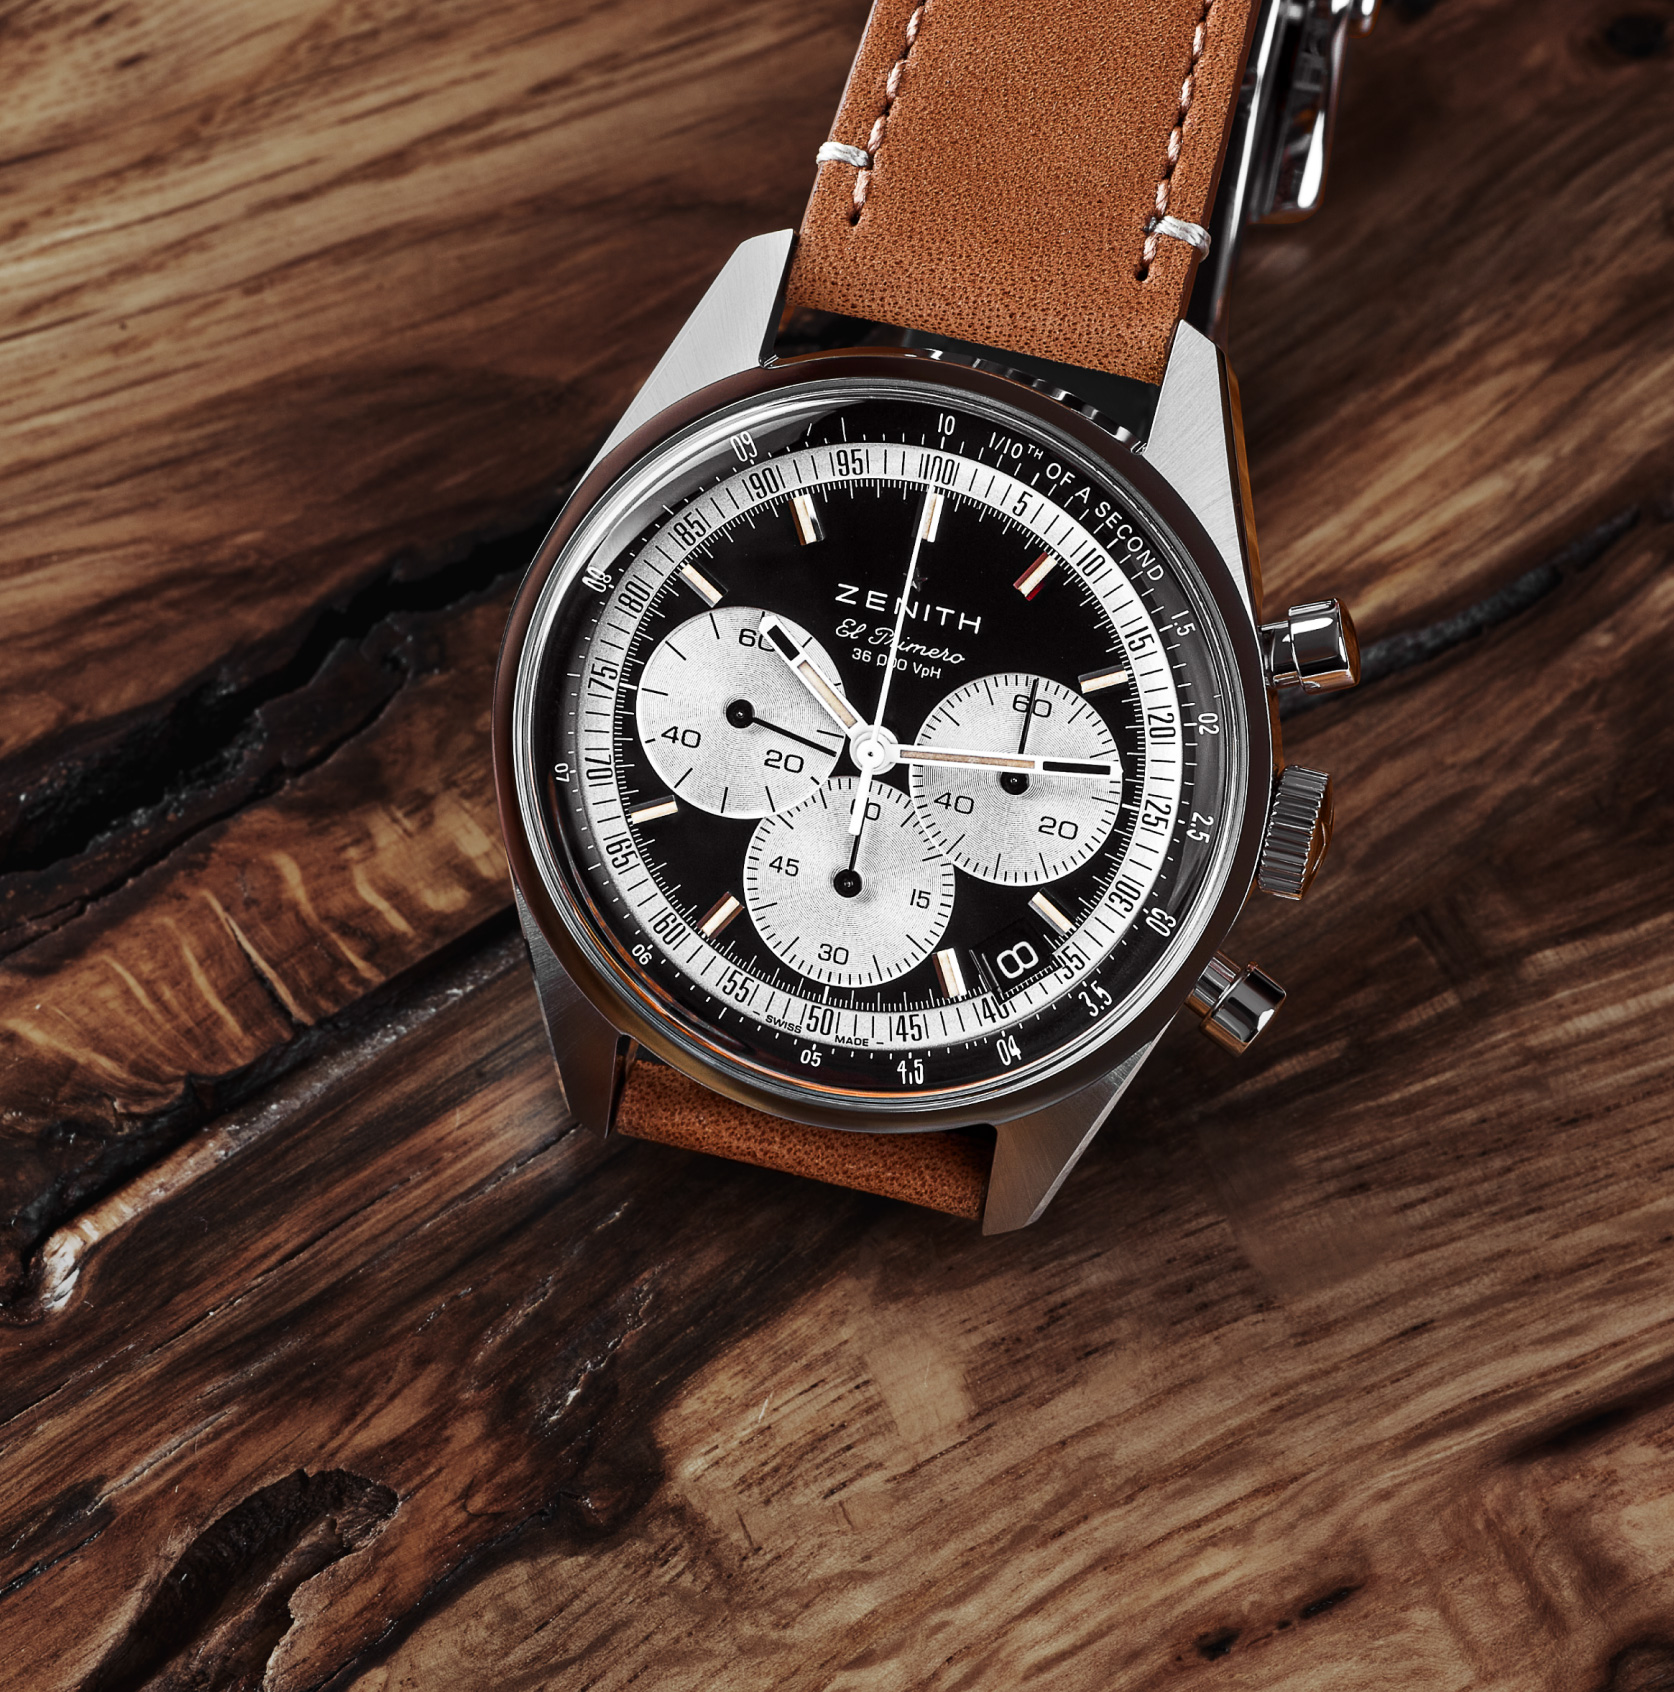 ZENITH watch on a wooden surface